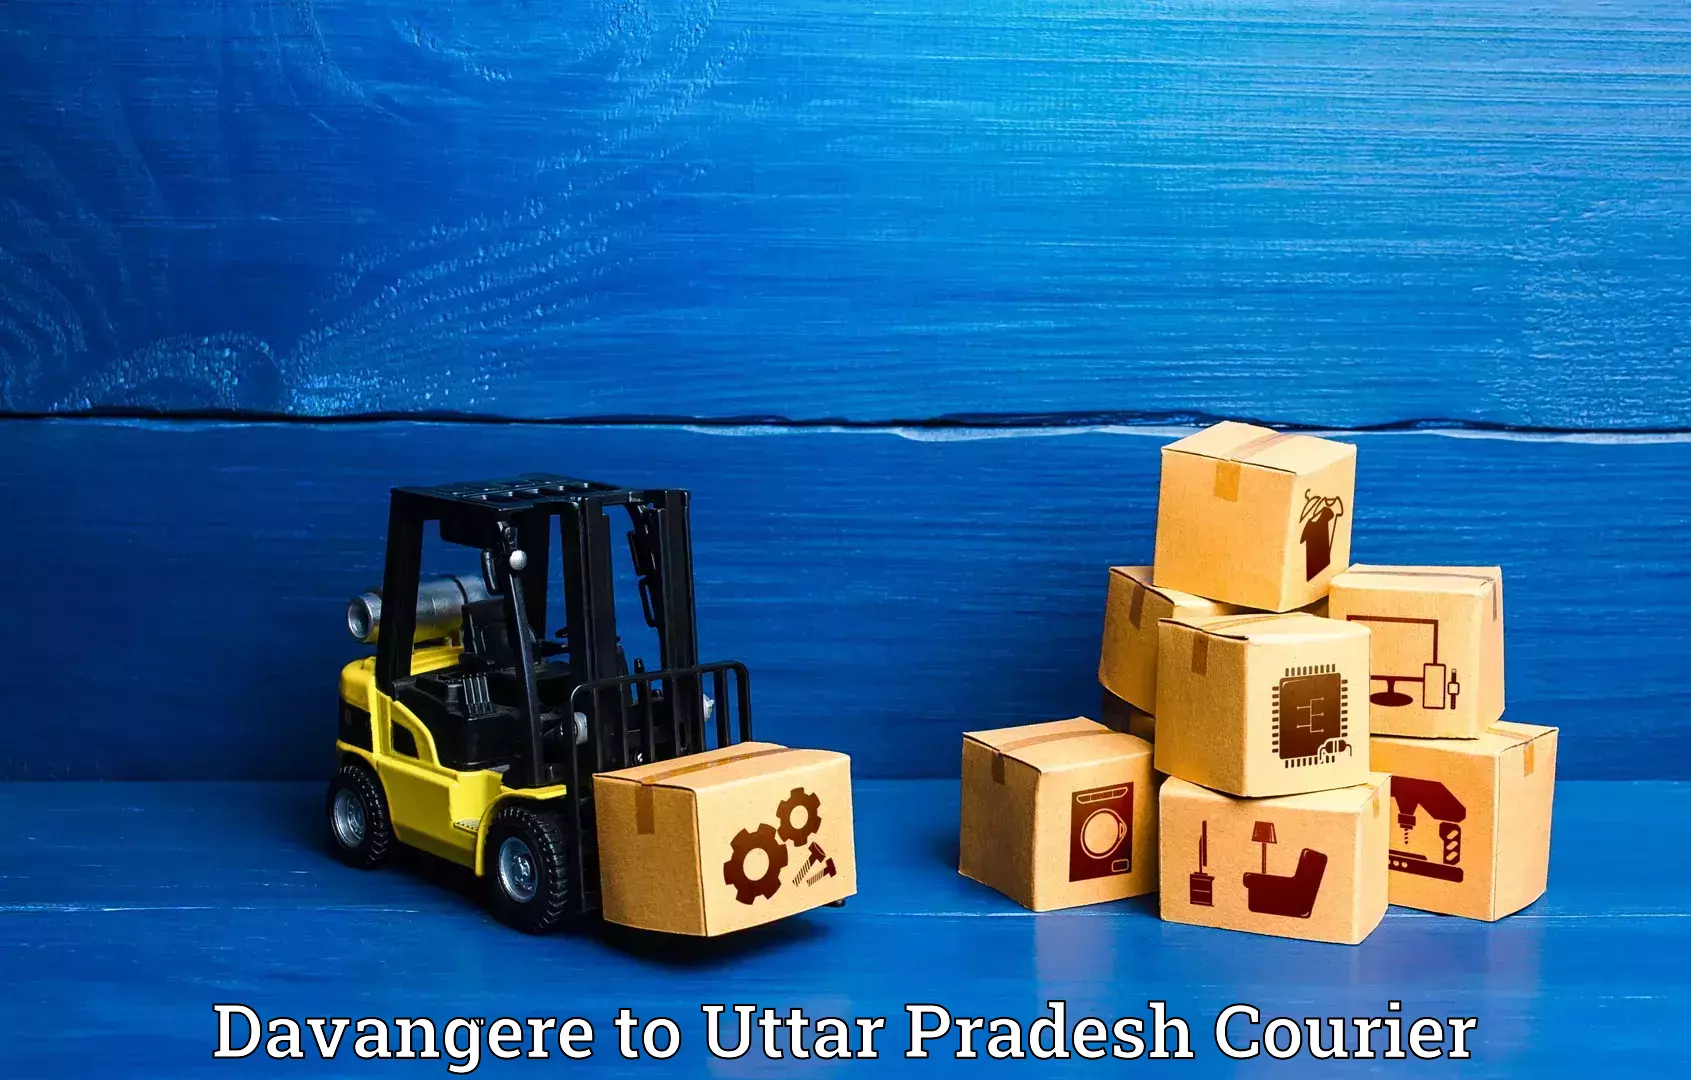 Luggage shipment strategy Davangere to Agra